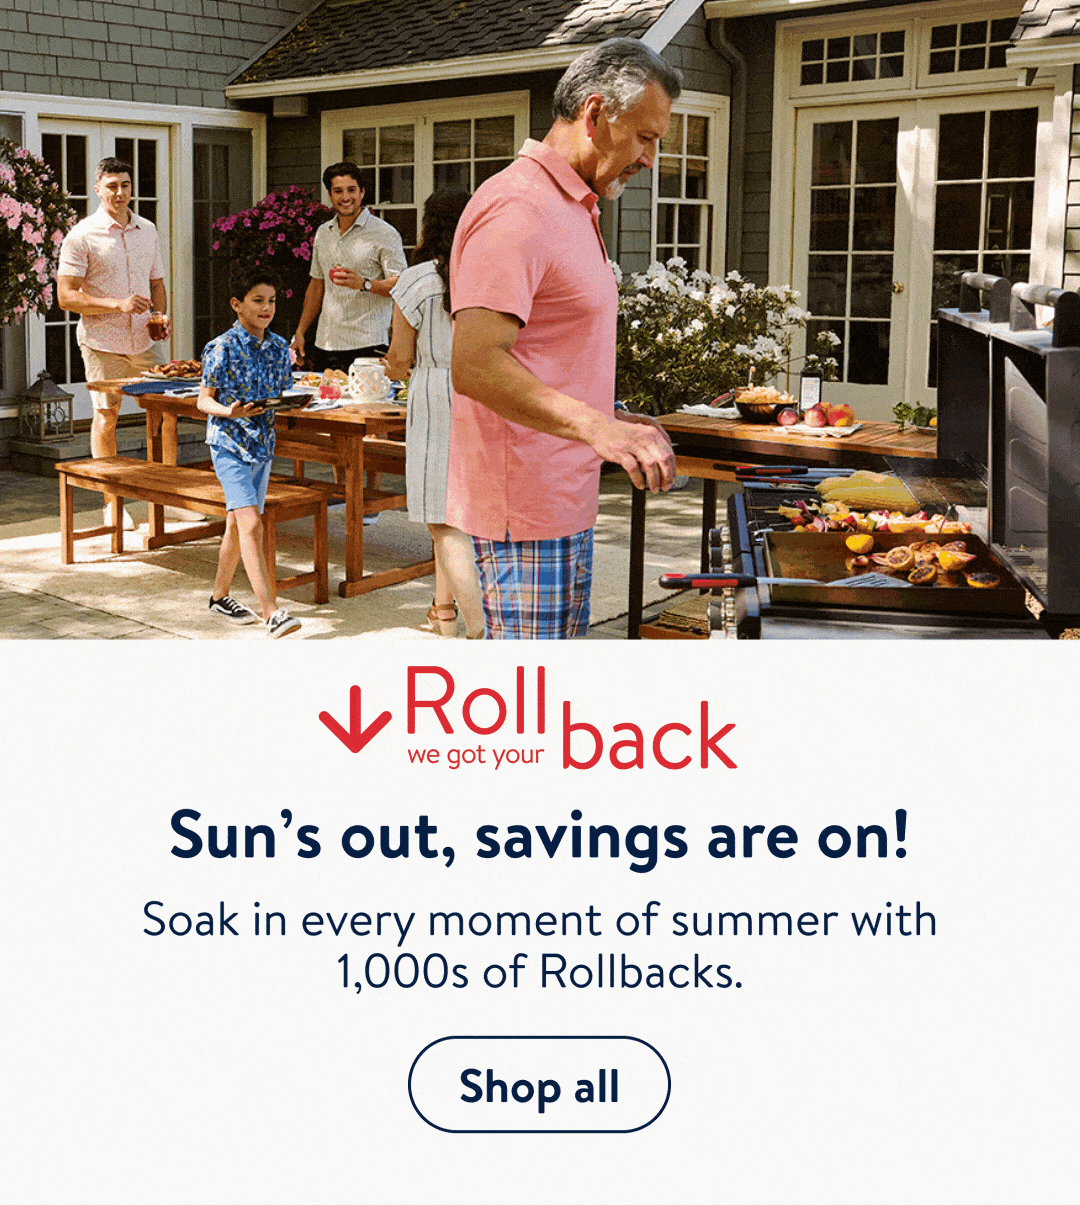  Suns out, savings are on! Soak in every moment of summer with 1,000s of Rollbacks. 